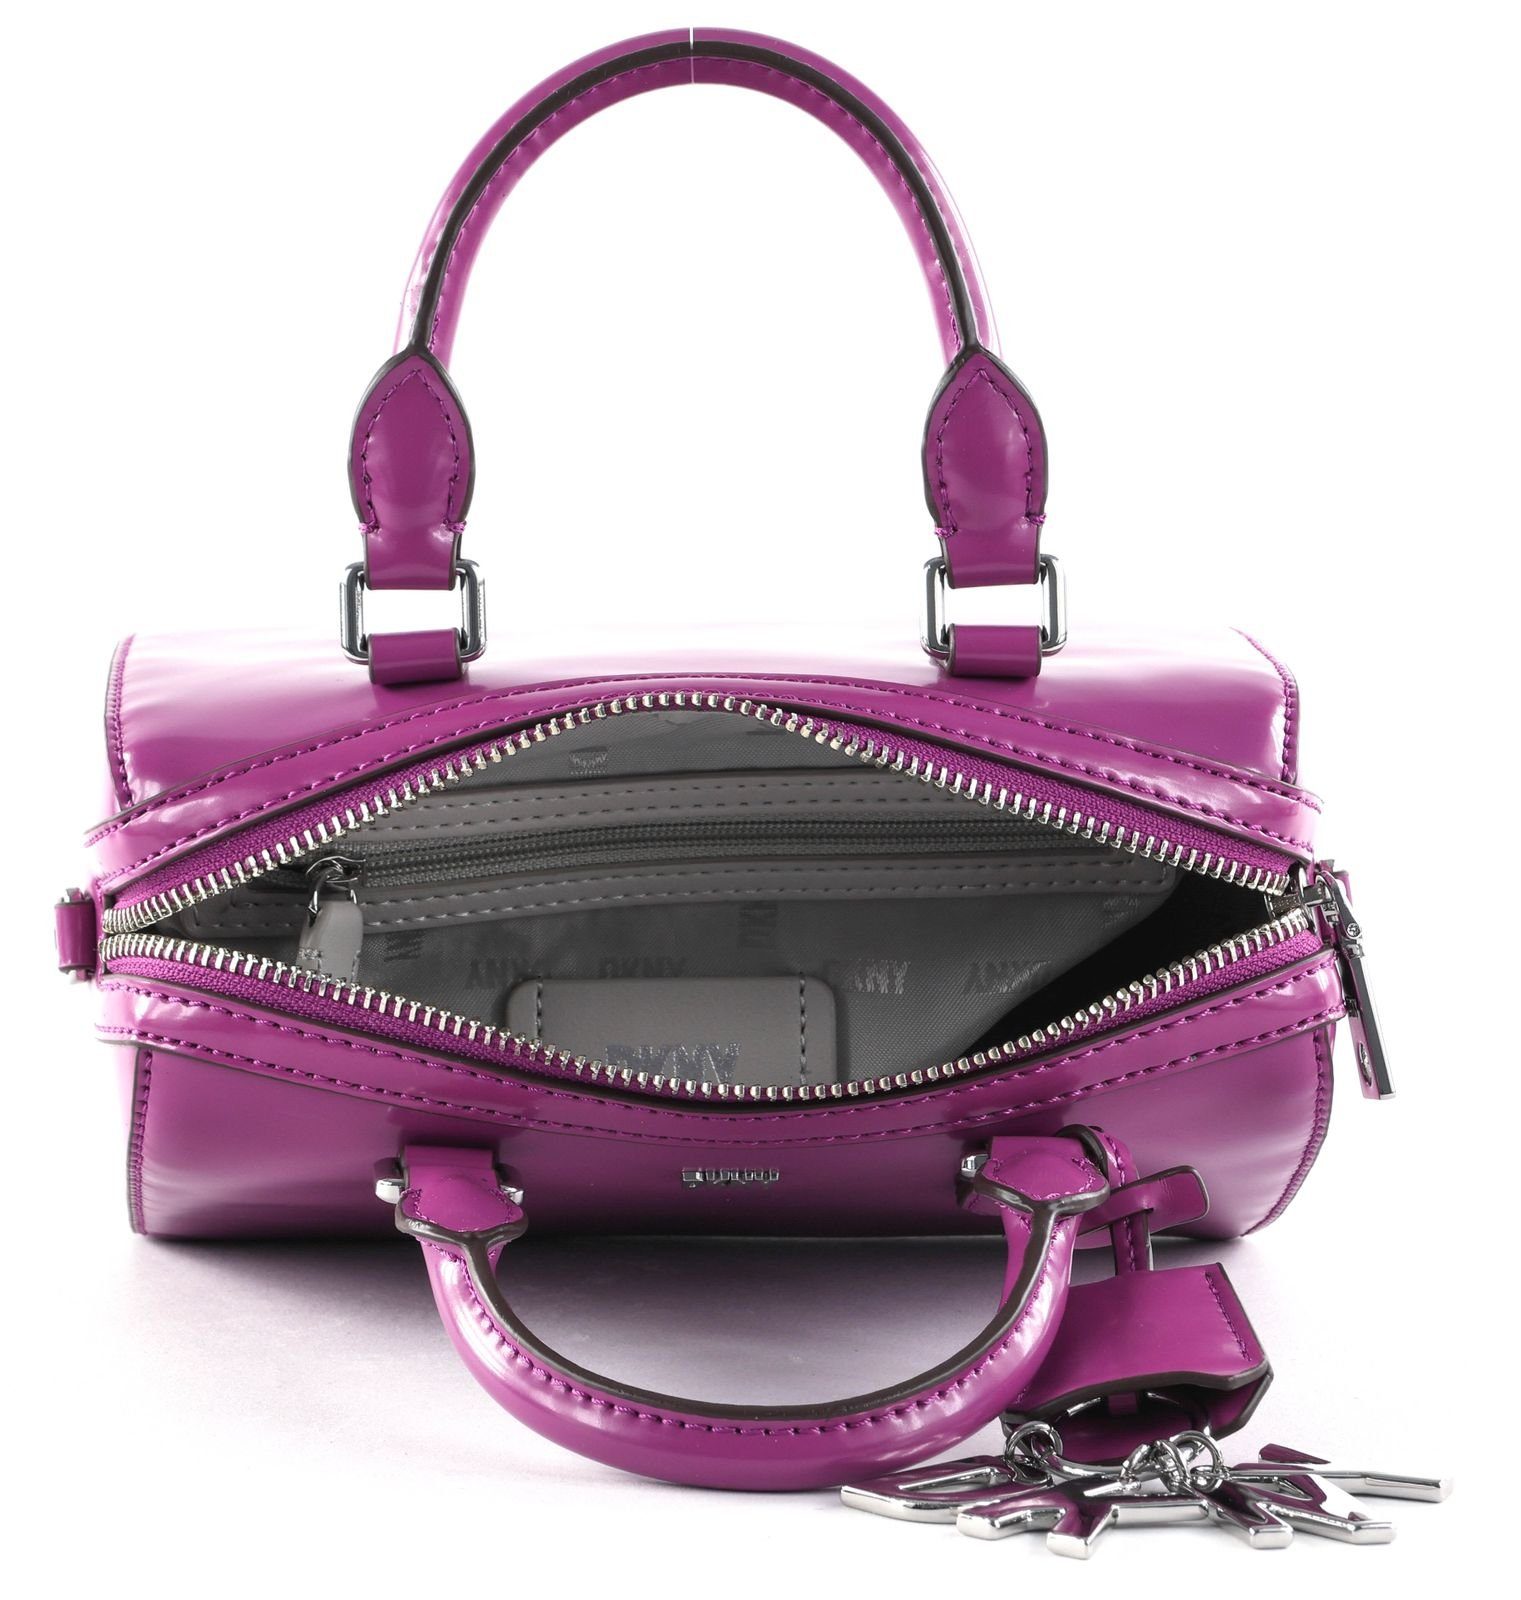 Handtasche Orchid Paige DKNY DK